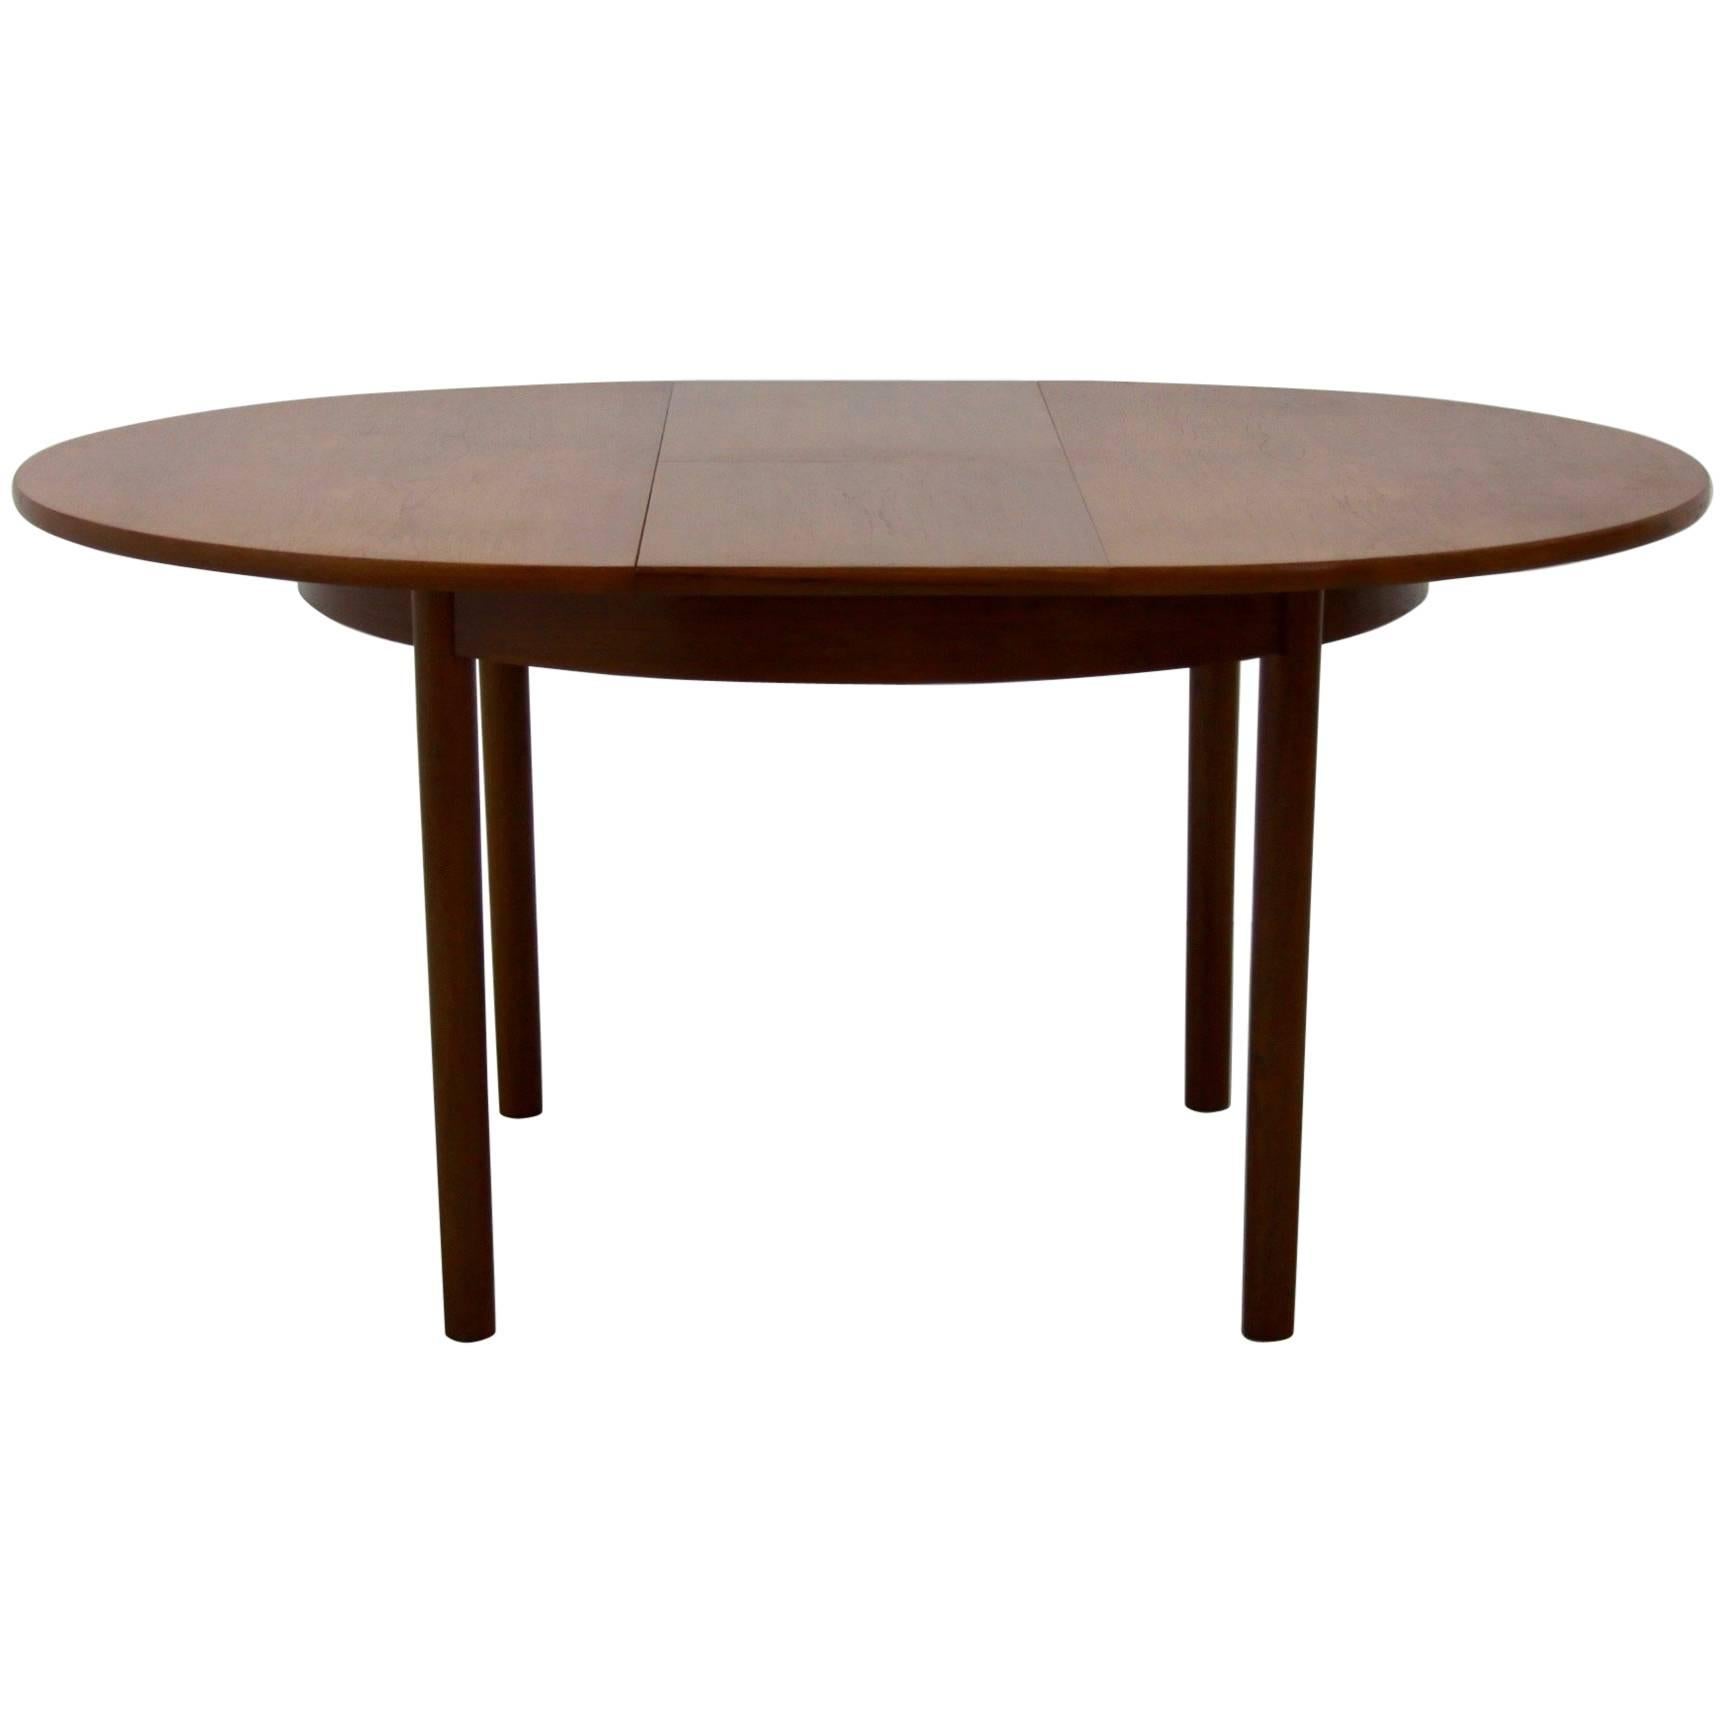 Midcentury Extendable Teak Dining Table from Vanson, 1960s For Sale